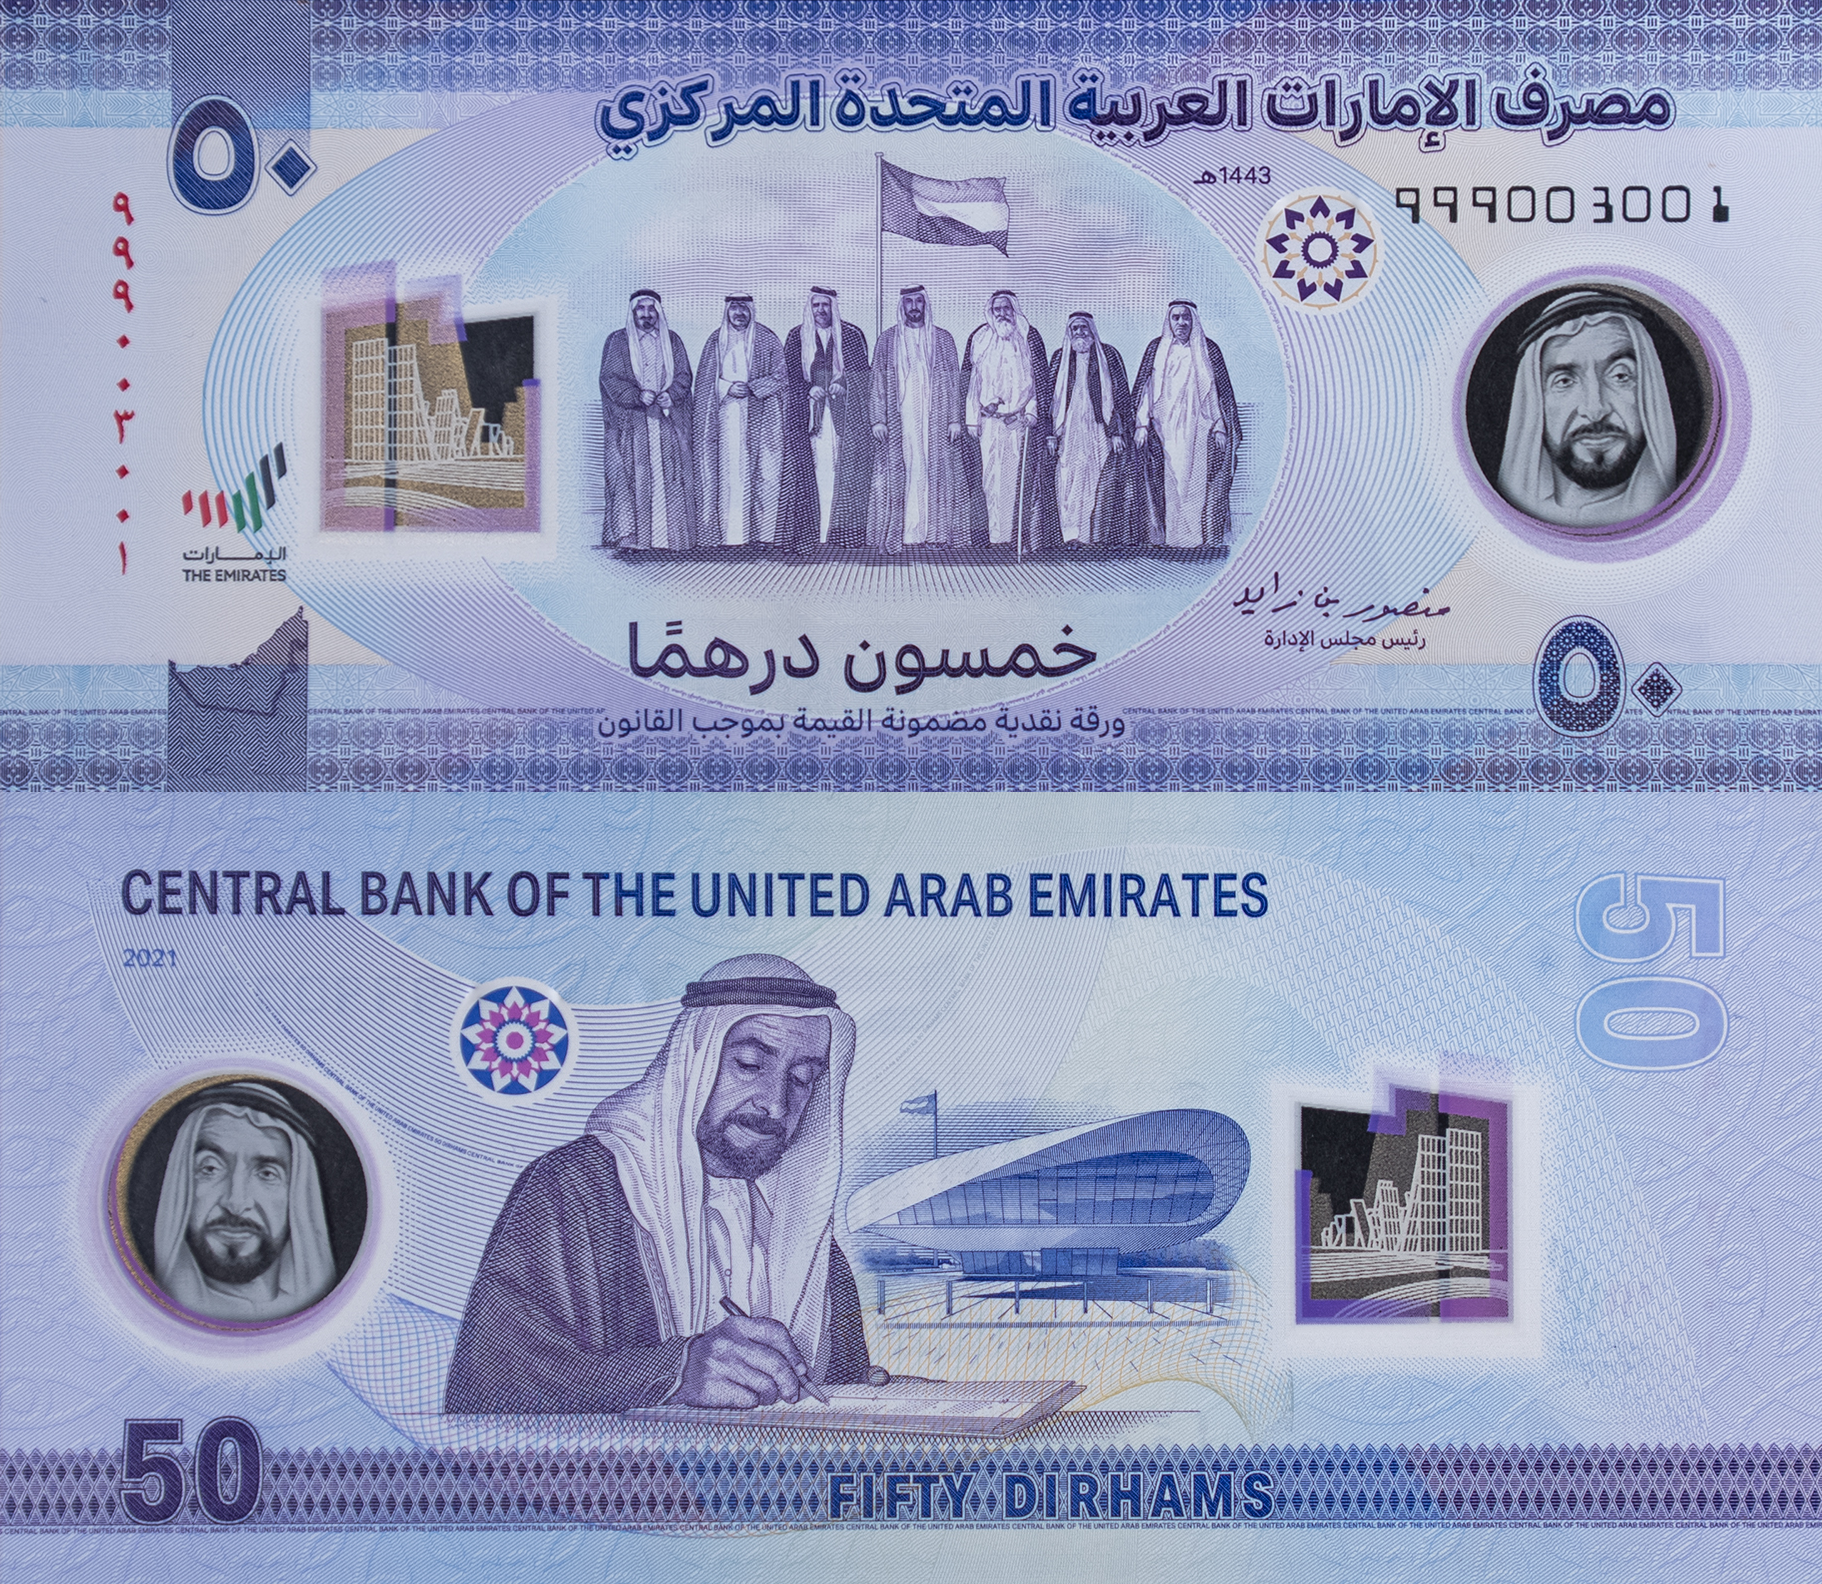 Obverse and reverse of new polymer banknote 50 United Arab Emirates Dirham